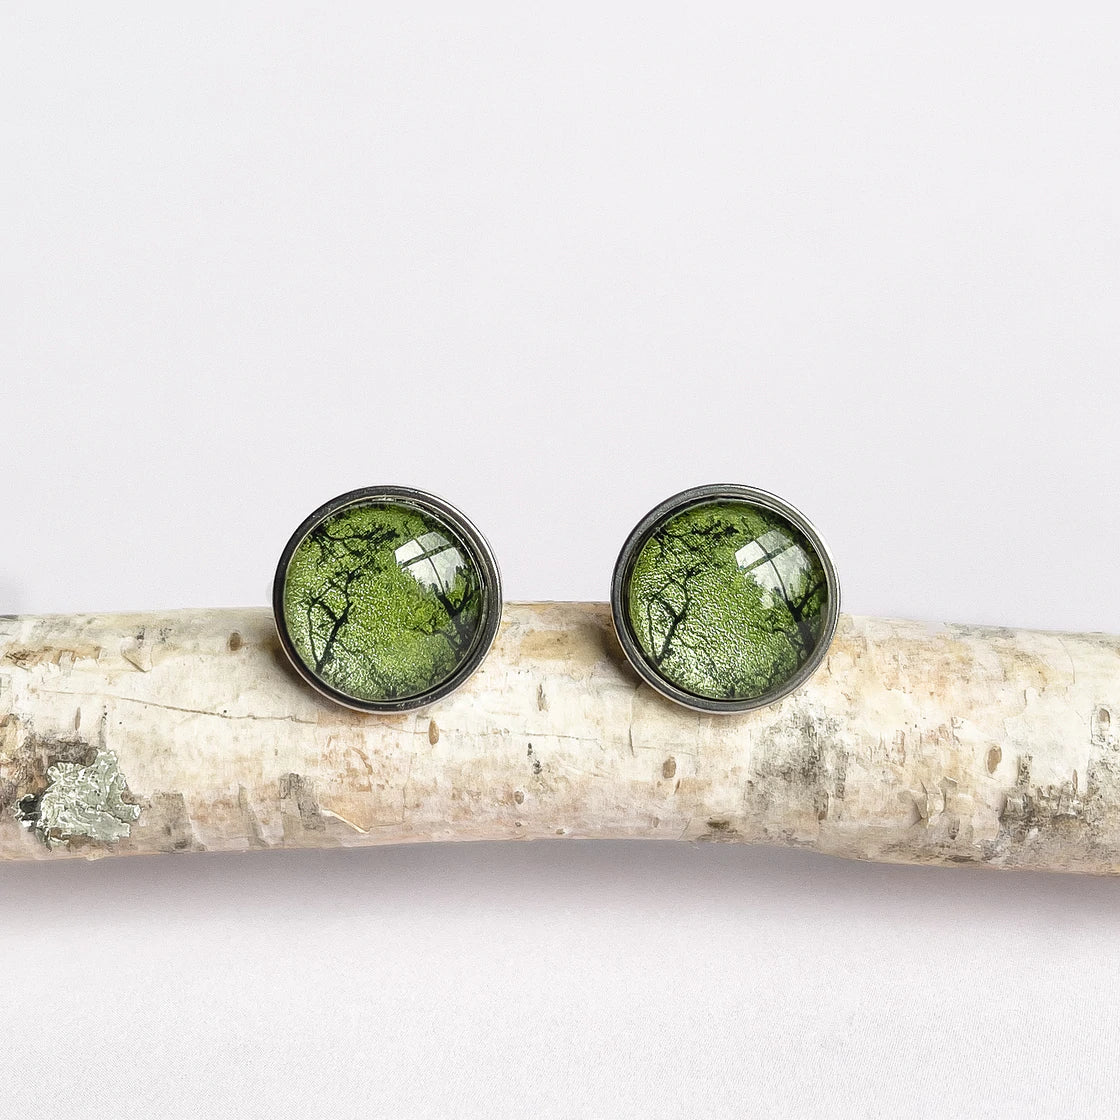 Myrtle & Me Stainless Steel Stud Earrings Gum Trees After Fire Green